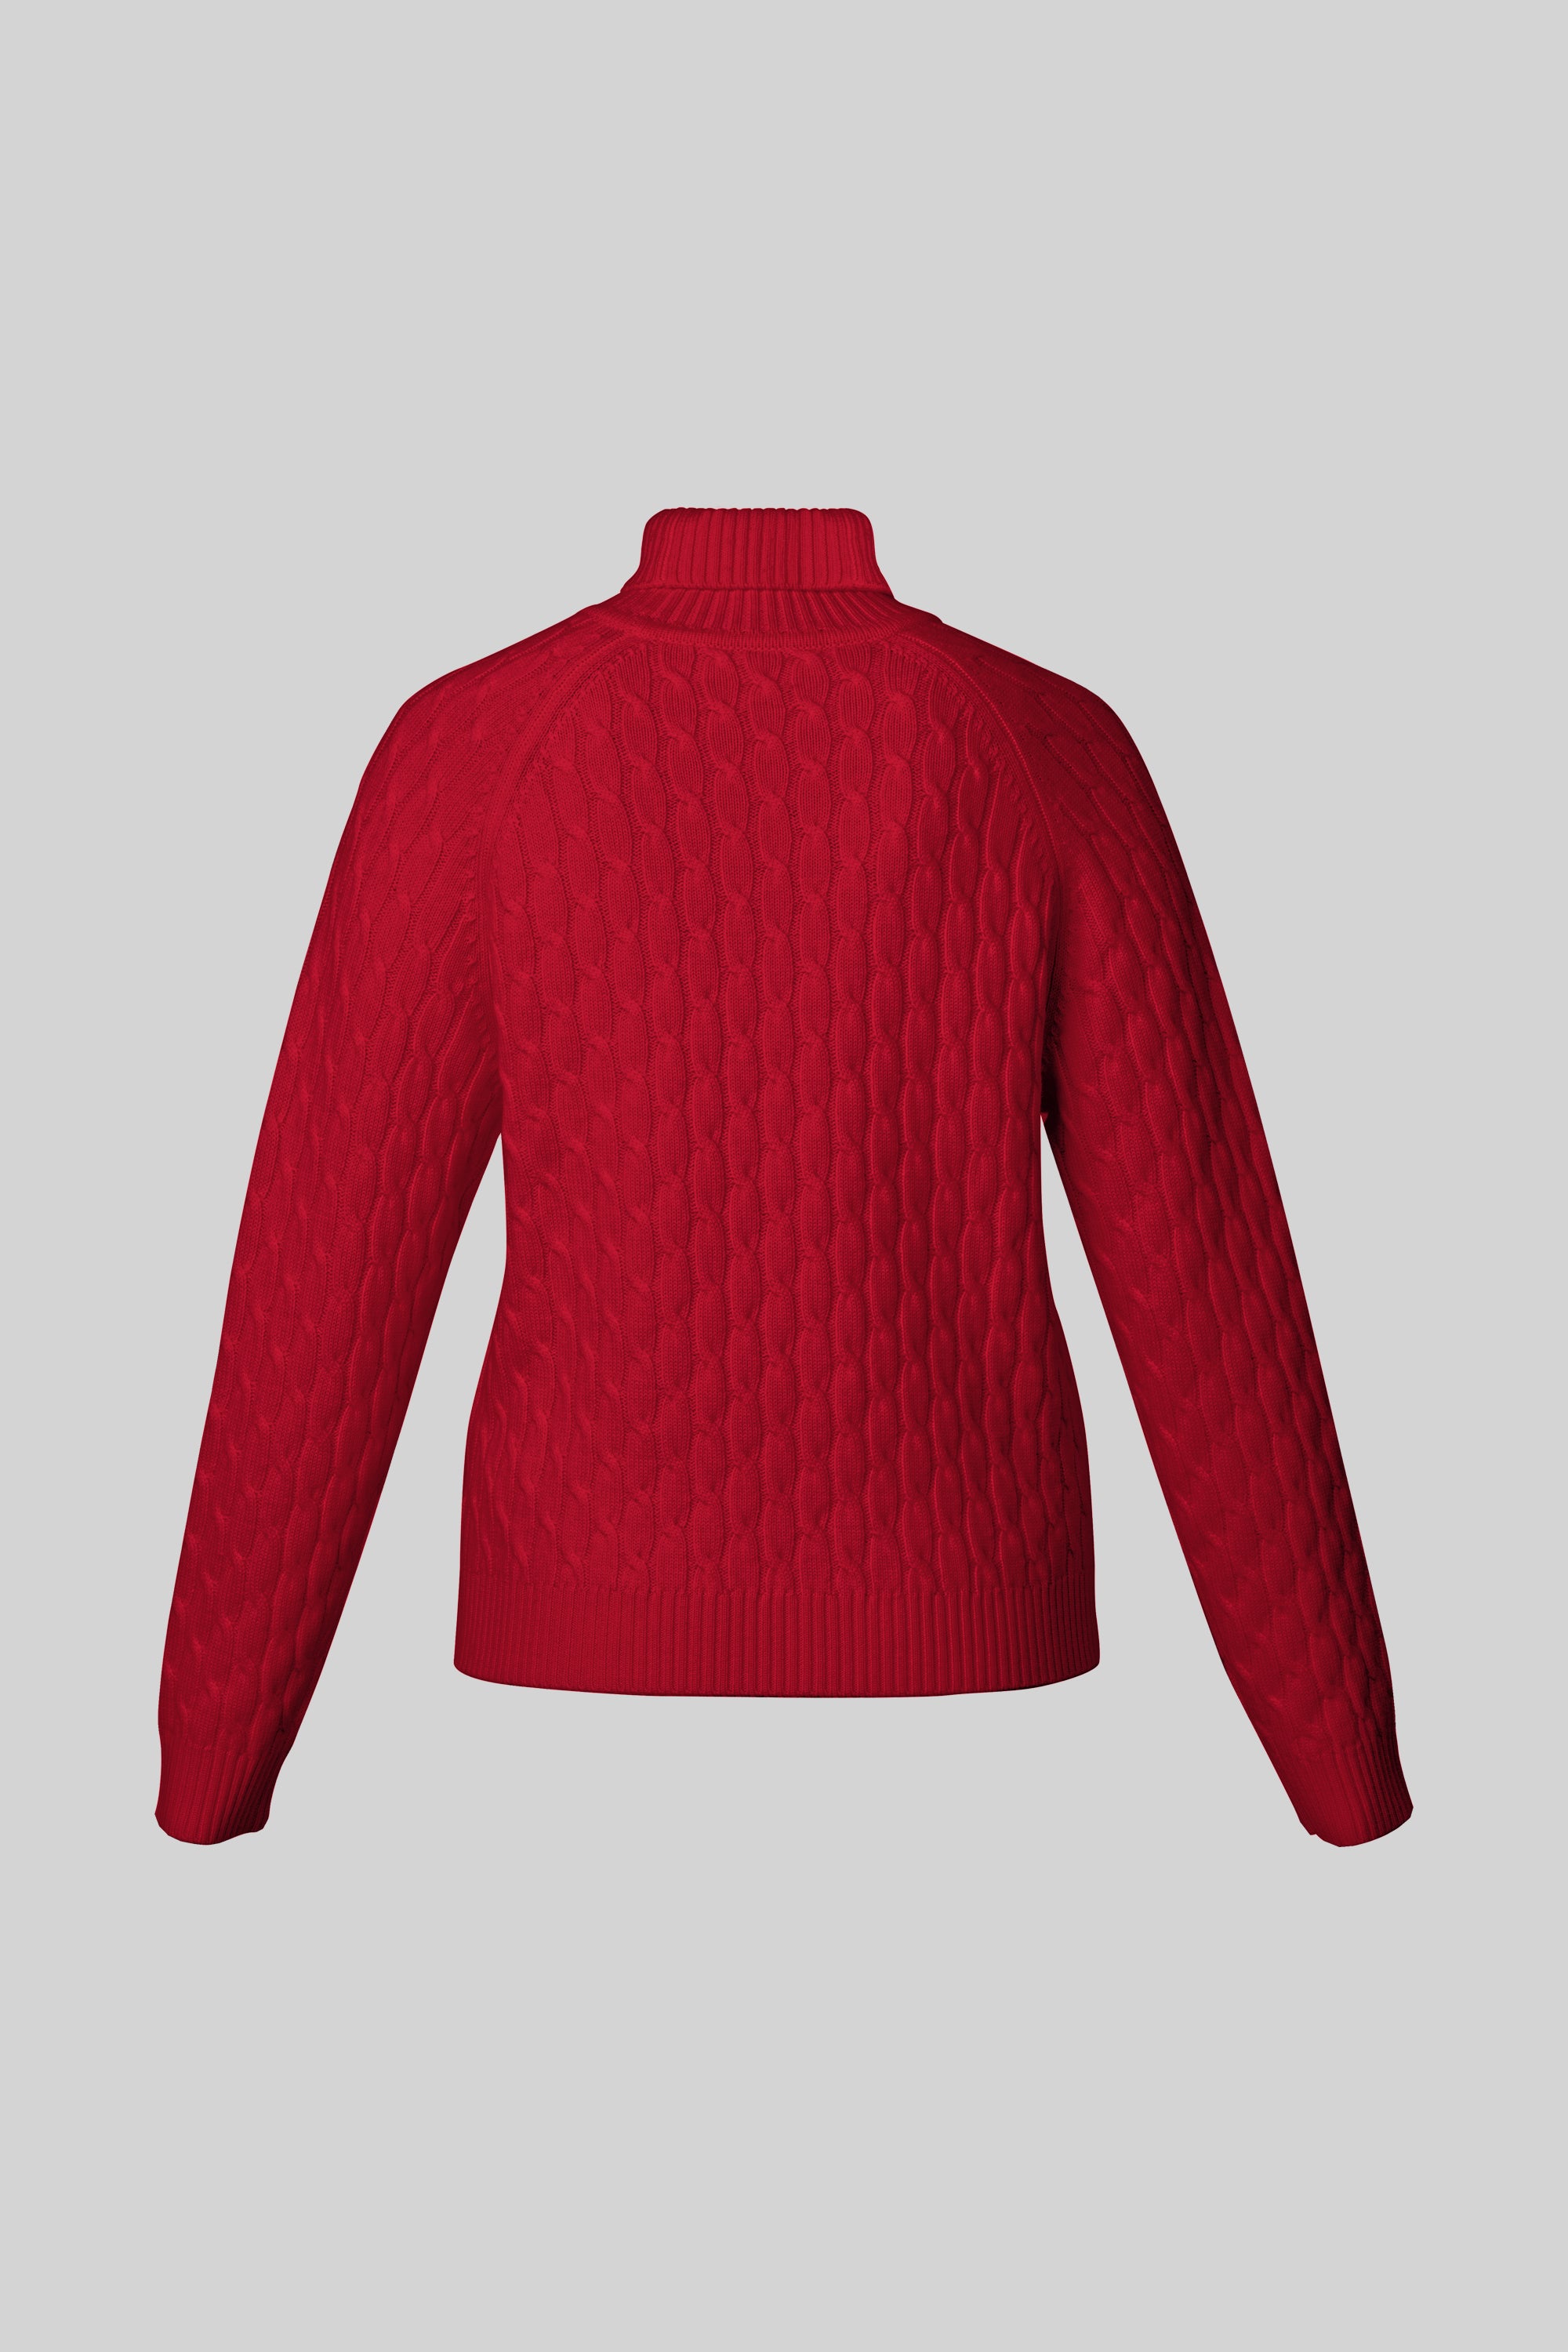 Corlears Cable Sweater in Lion Brand Wool Ease Thick & Quick - M22089 WETQ  - Downloadable PDF